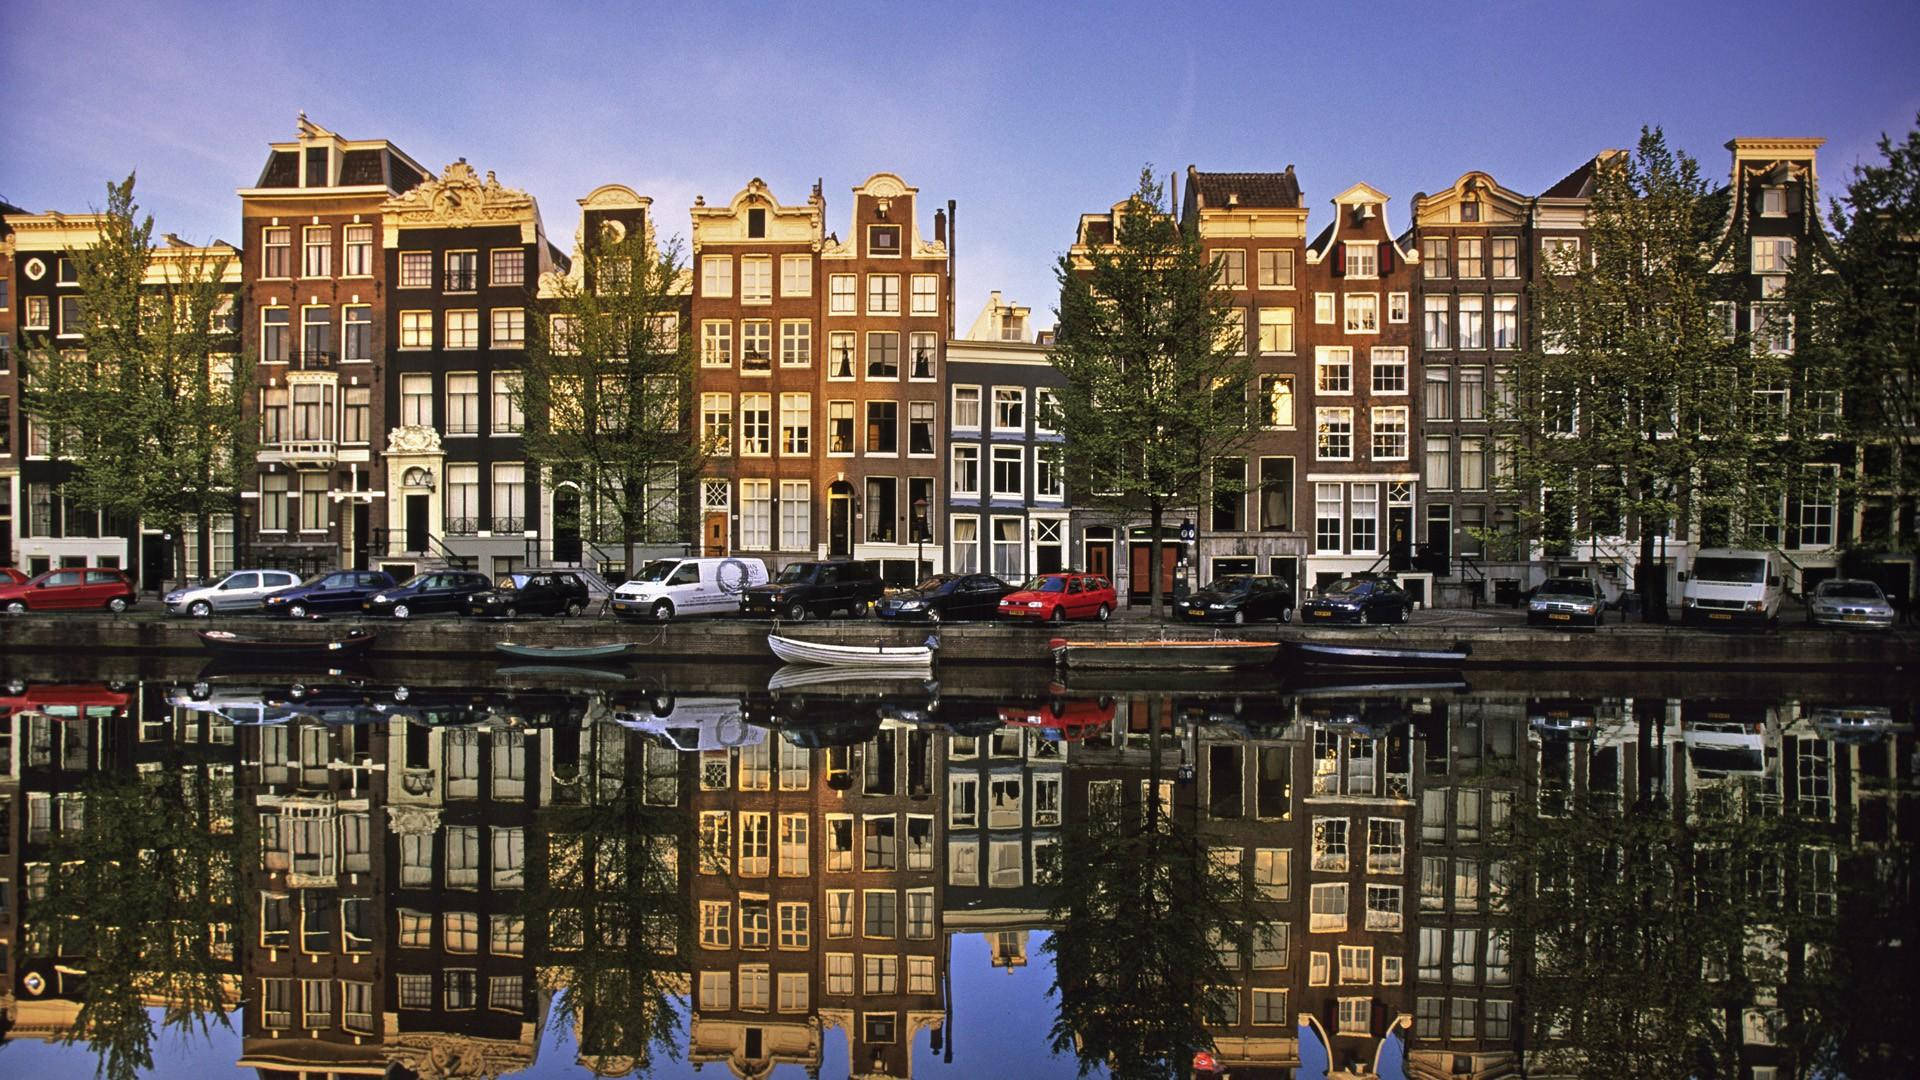 Aesthetic Amsterdam Canal House Background